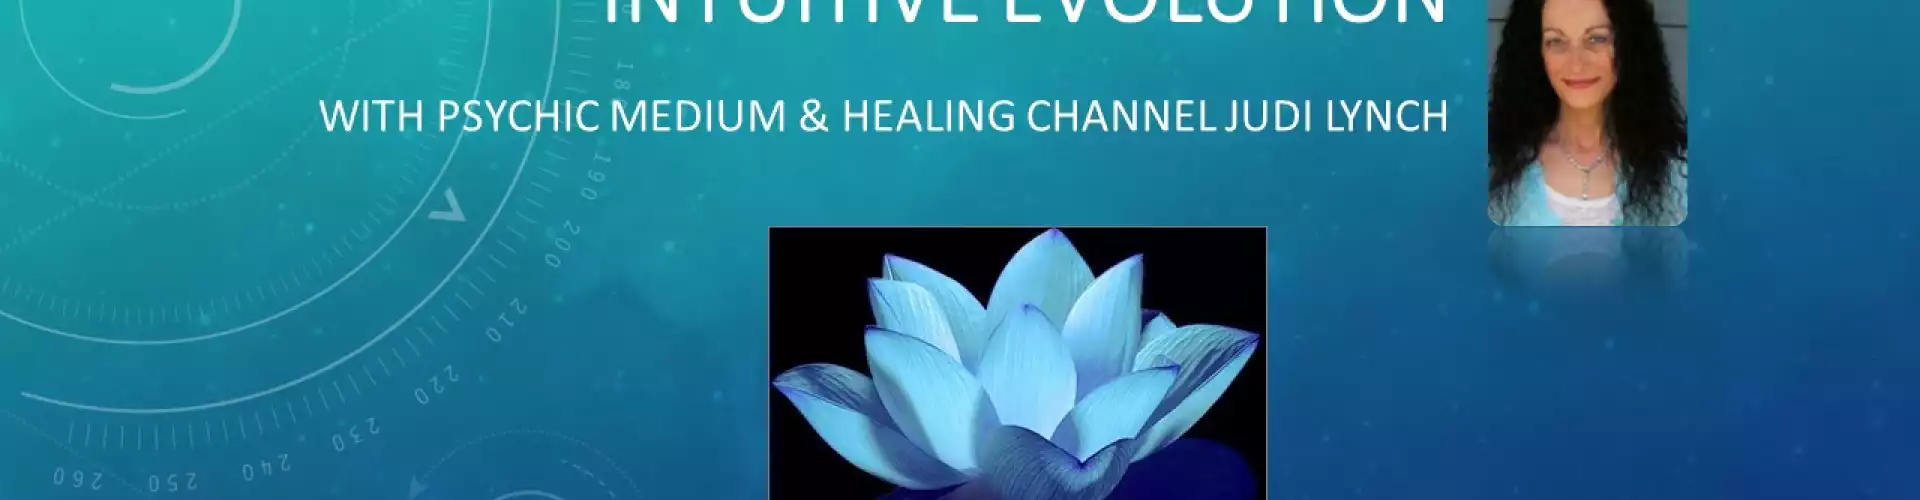 Intuitive Evolution with Judi Lynch